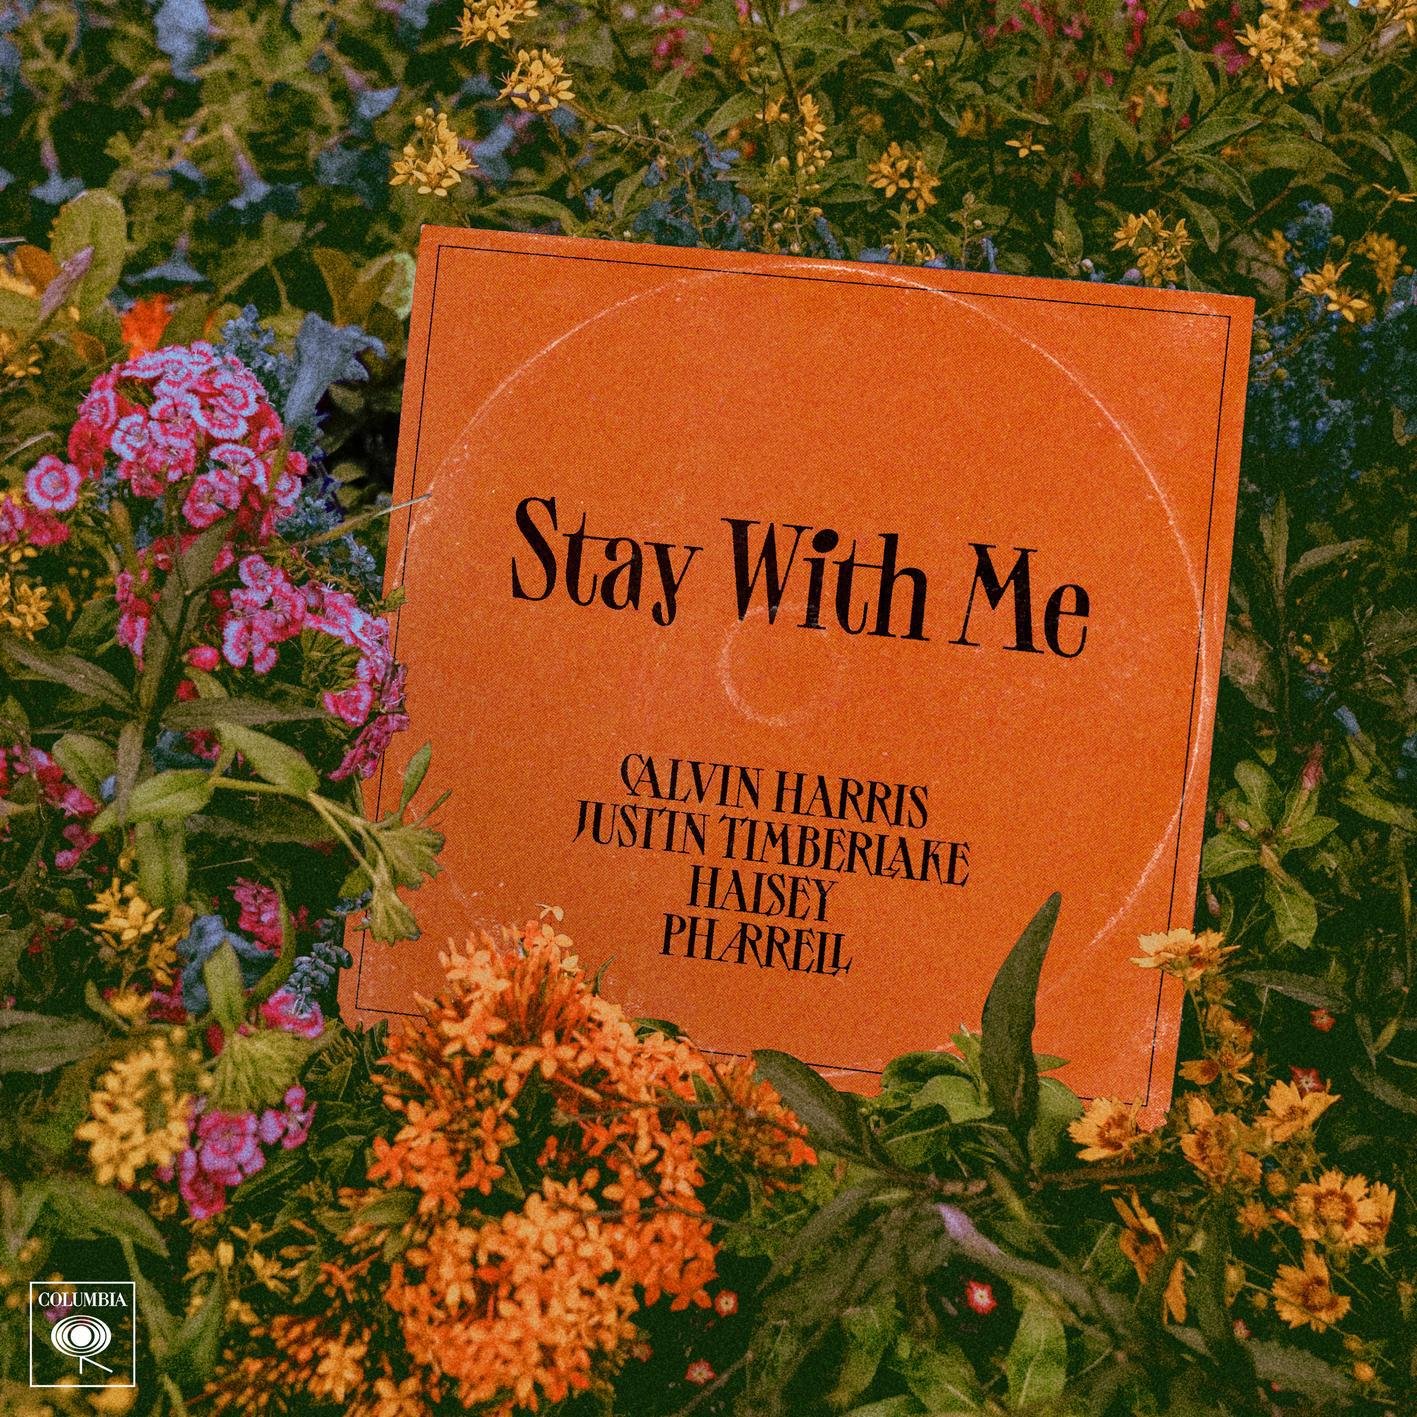 Calvin Harris/.《Stay With Me》[MP3-320K/8.8M]